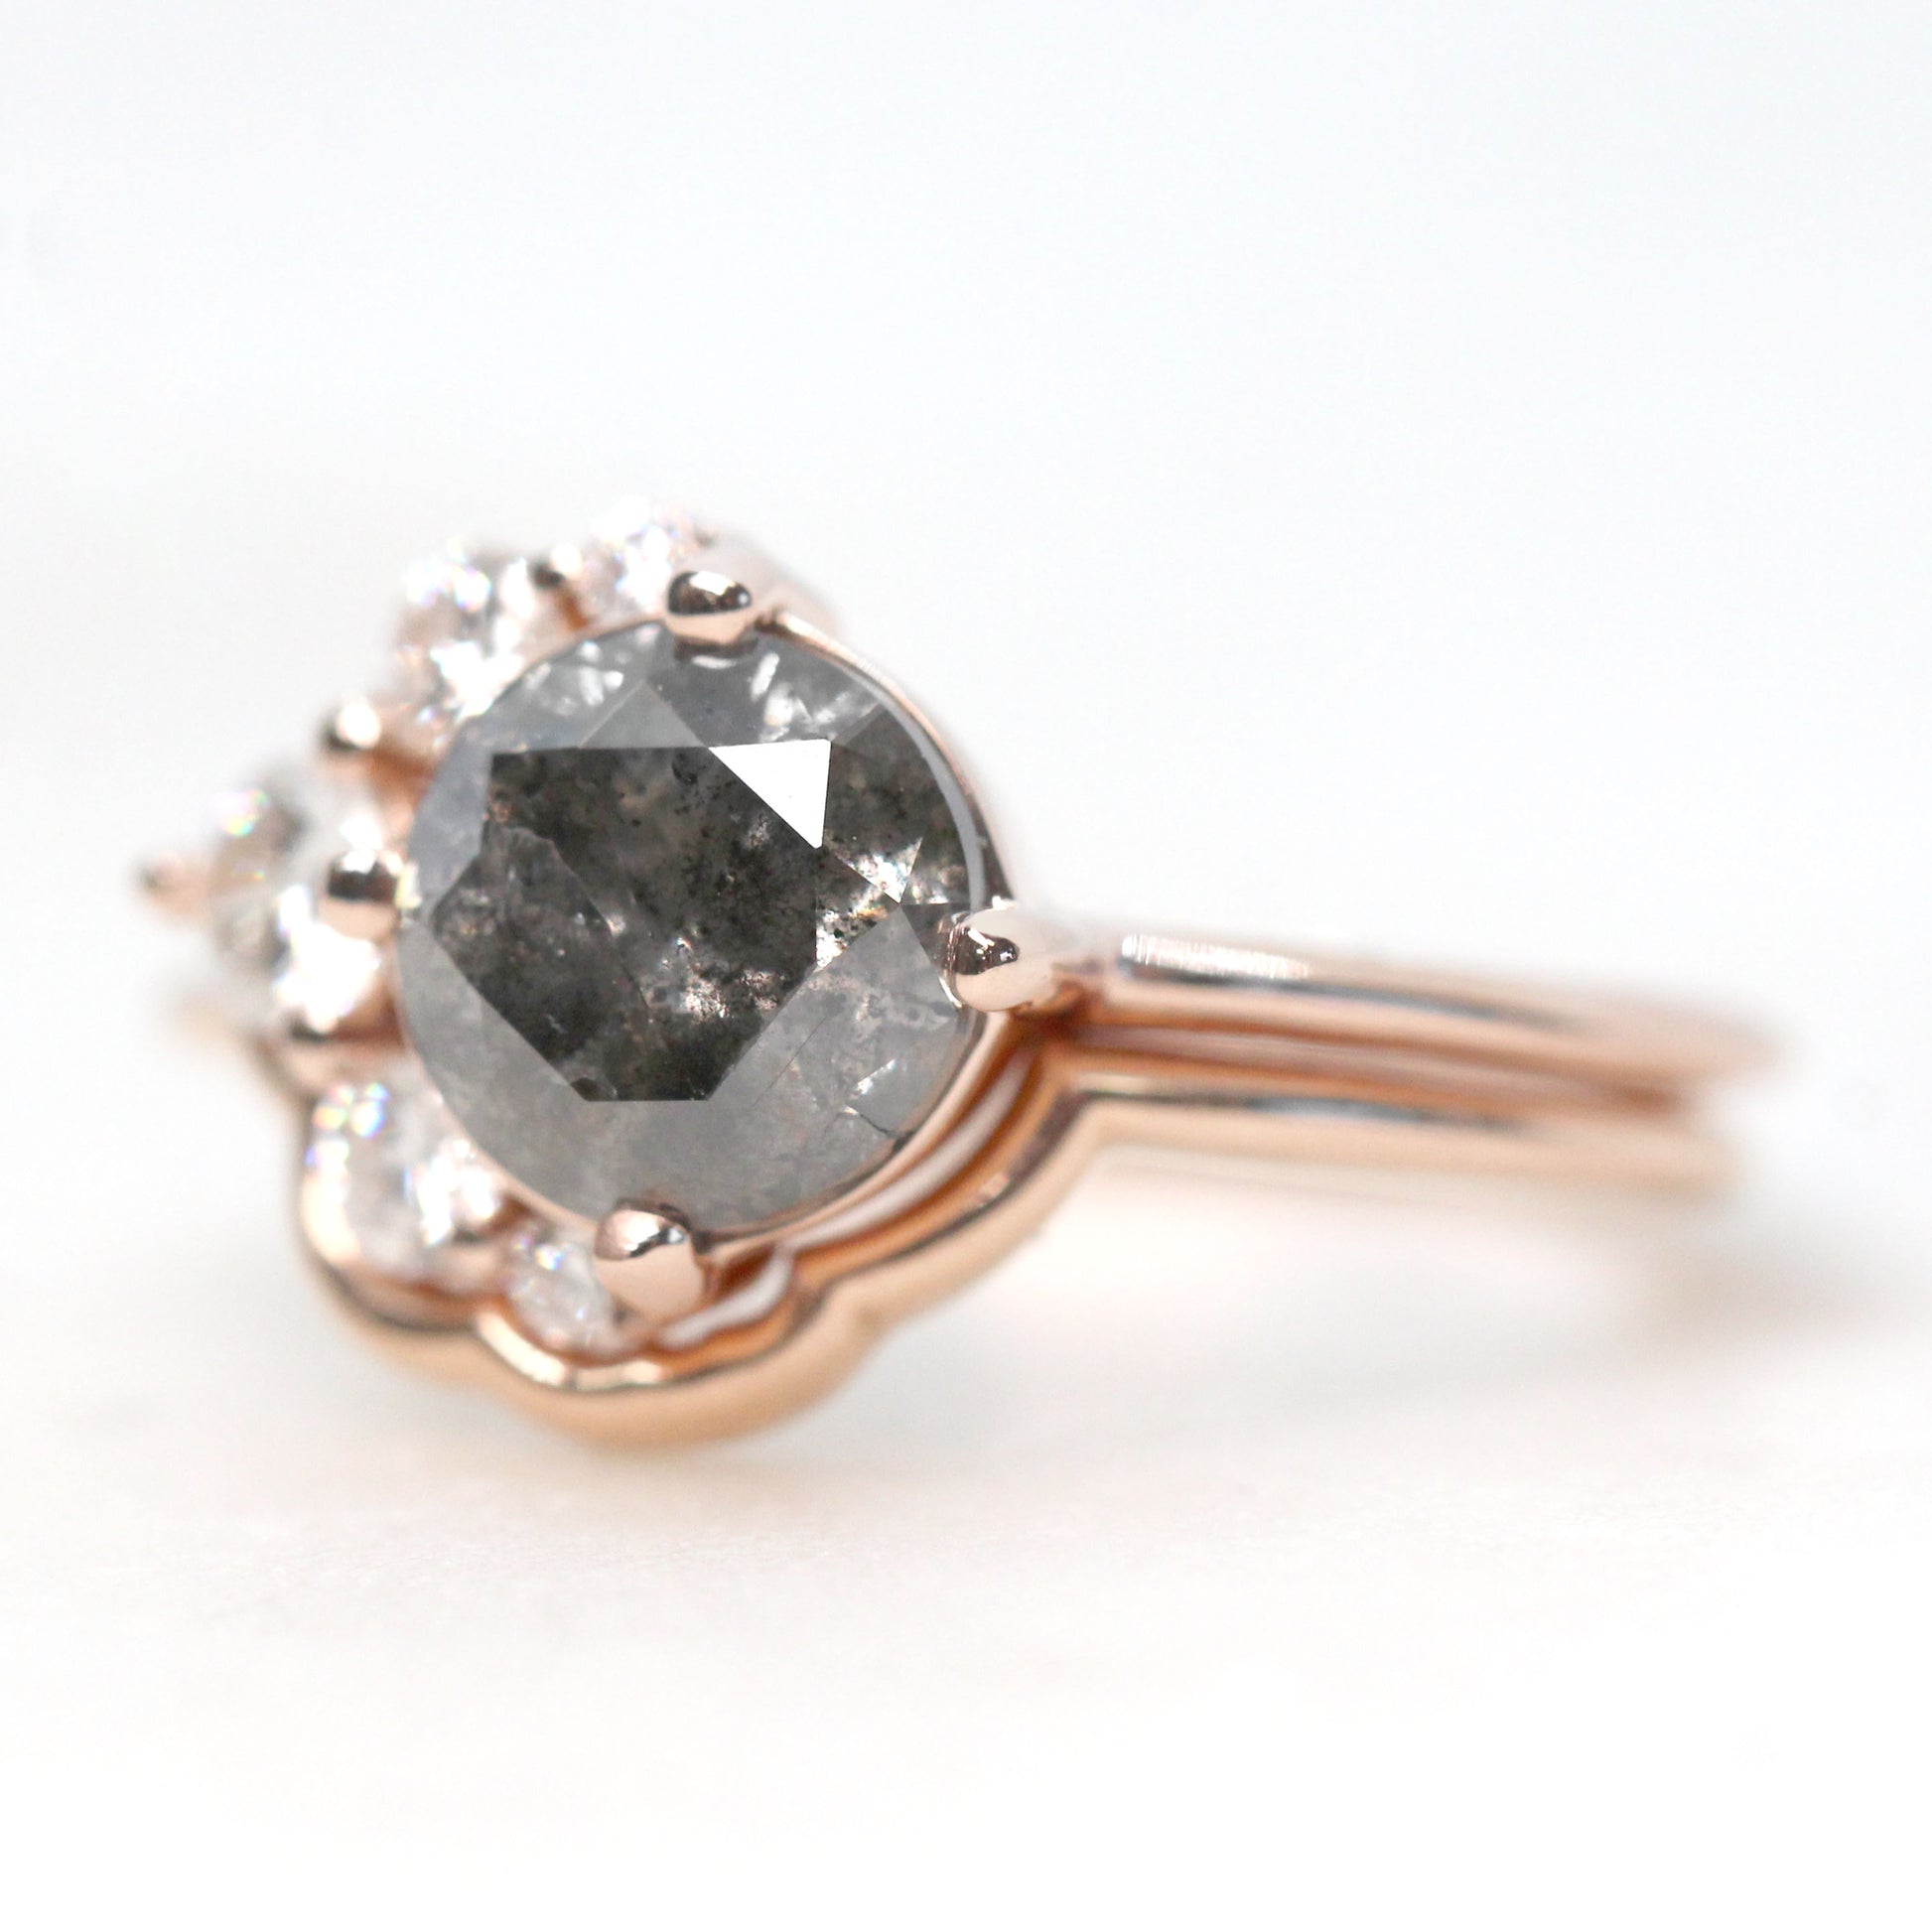 Carell Ring + Band with a 1.98 Carat Black Round Celestial Diamond and White Accent Diamonds in 14k Rose Gold - Ready to Size and Ship - Midwinter Co. Alternative Bridal Rings and Modern Fine Jewelry